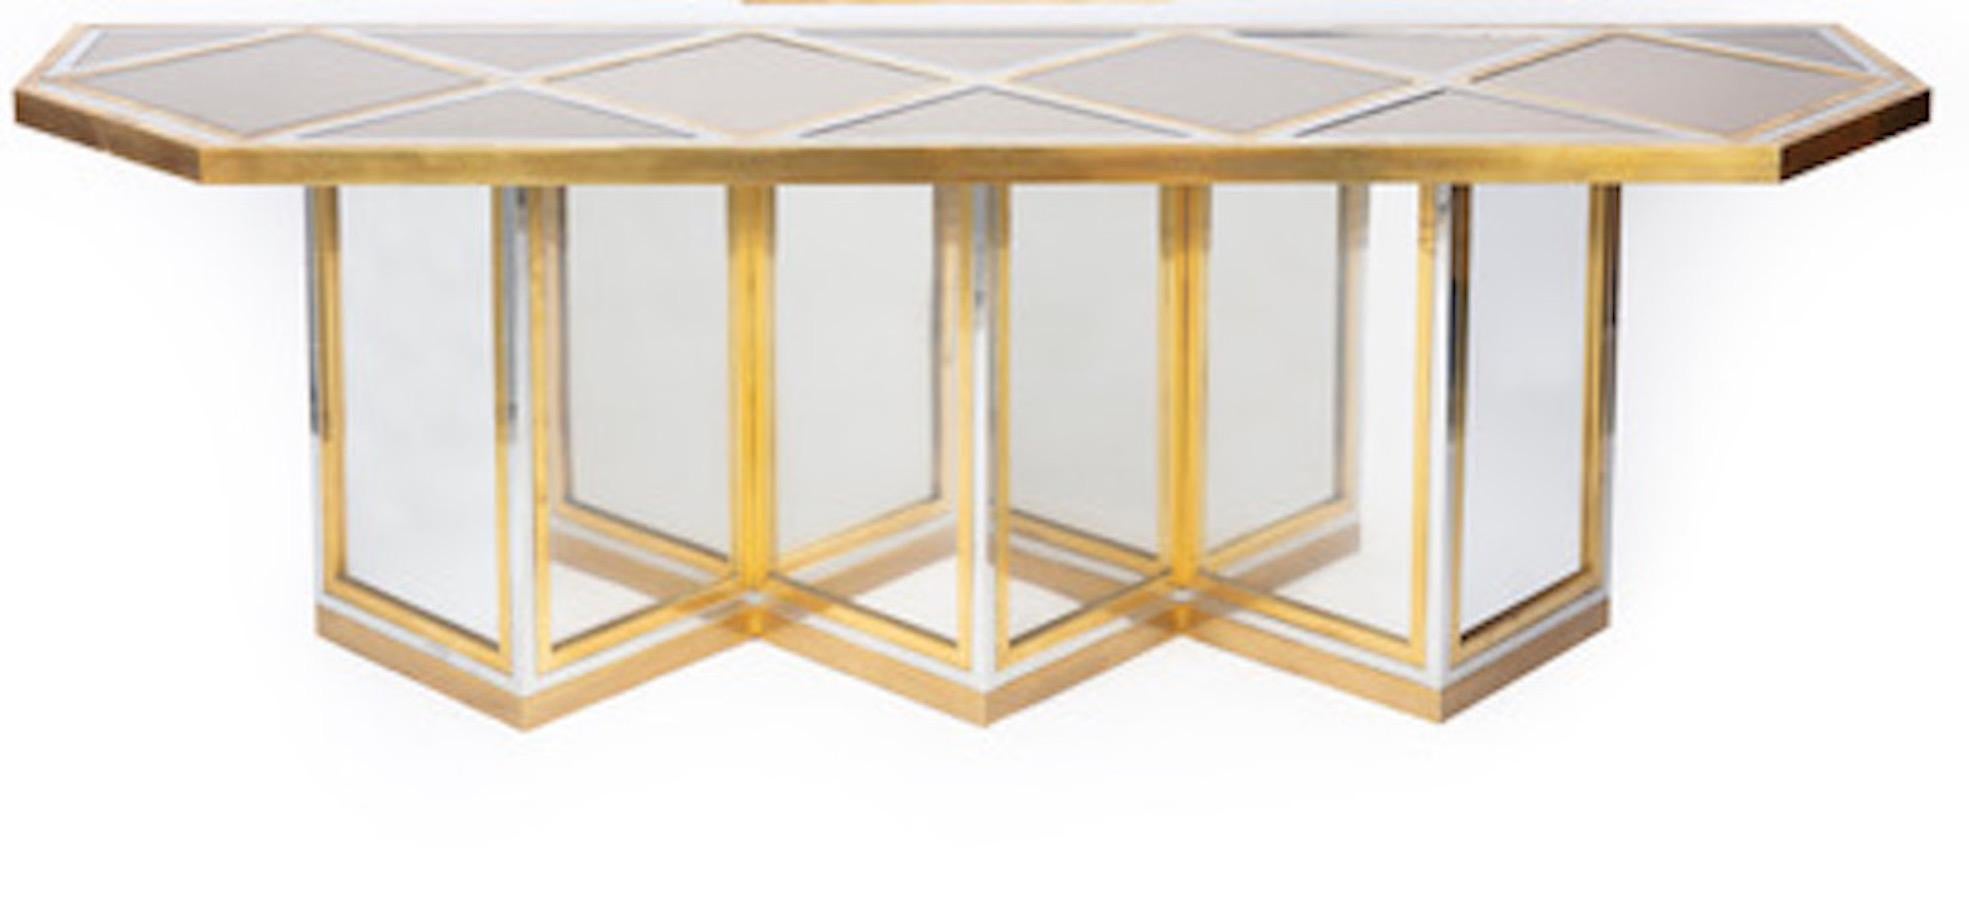 1970s Romeo Rega Brass, Steel and Glass Table Console.
Geometrical path of the base and top makes this table console an unique sculptural piece. Its big size 203 x 53 cm makes this table a very decorative piece. No restoration needed.

SHIPPING